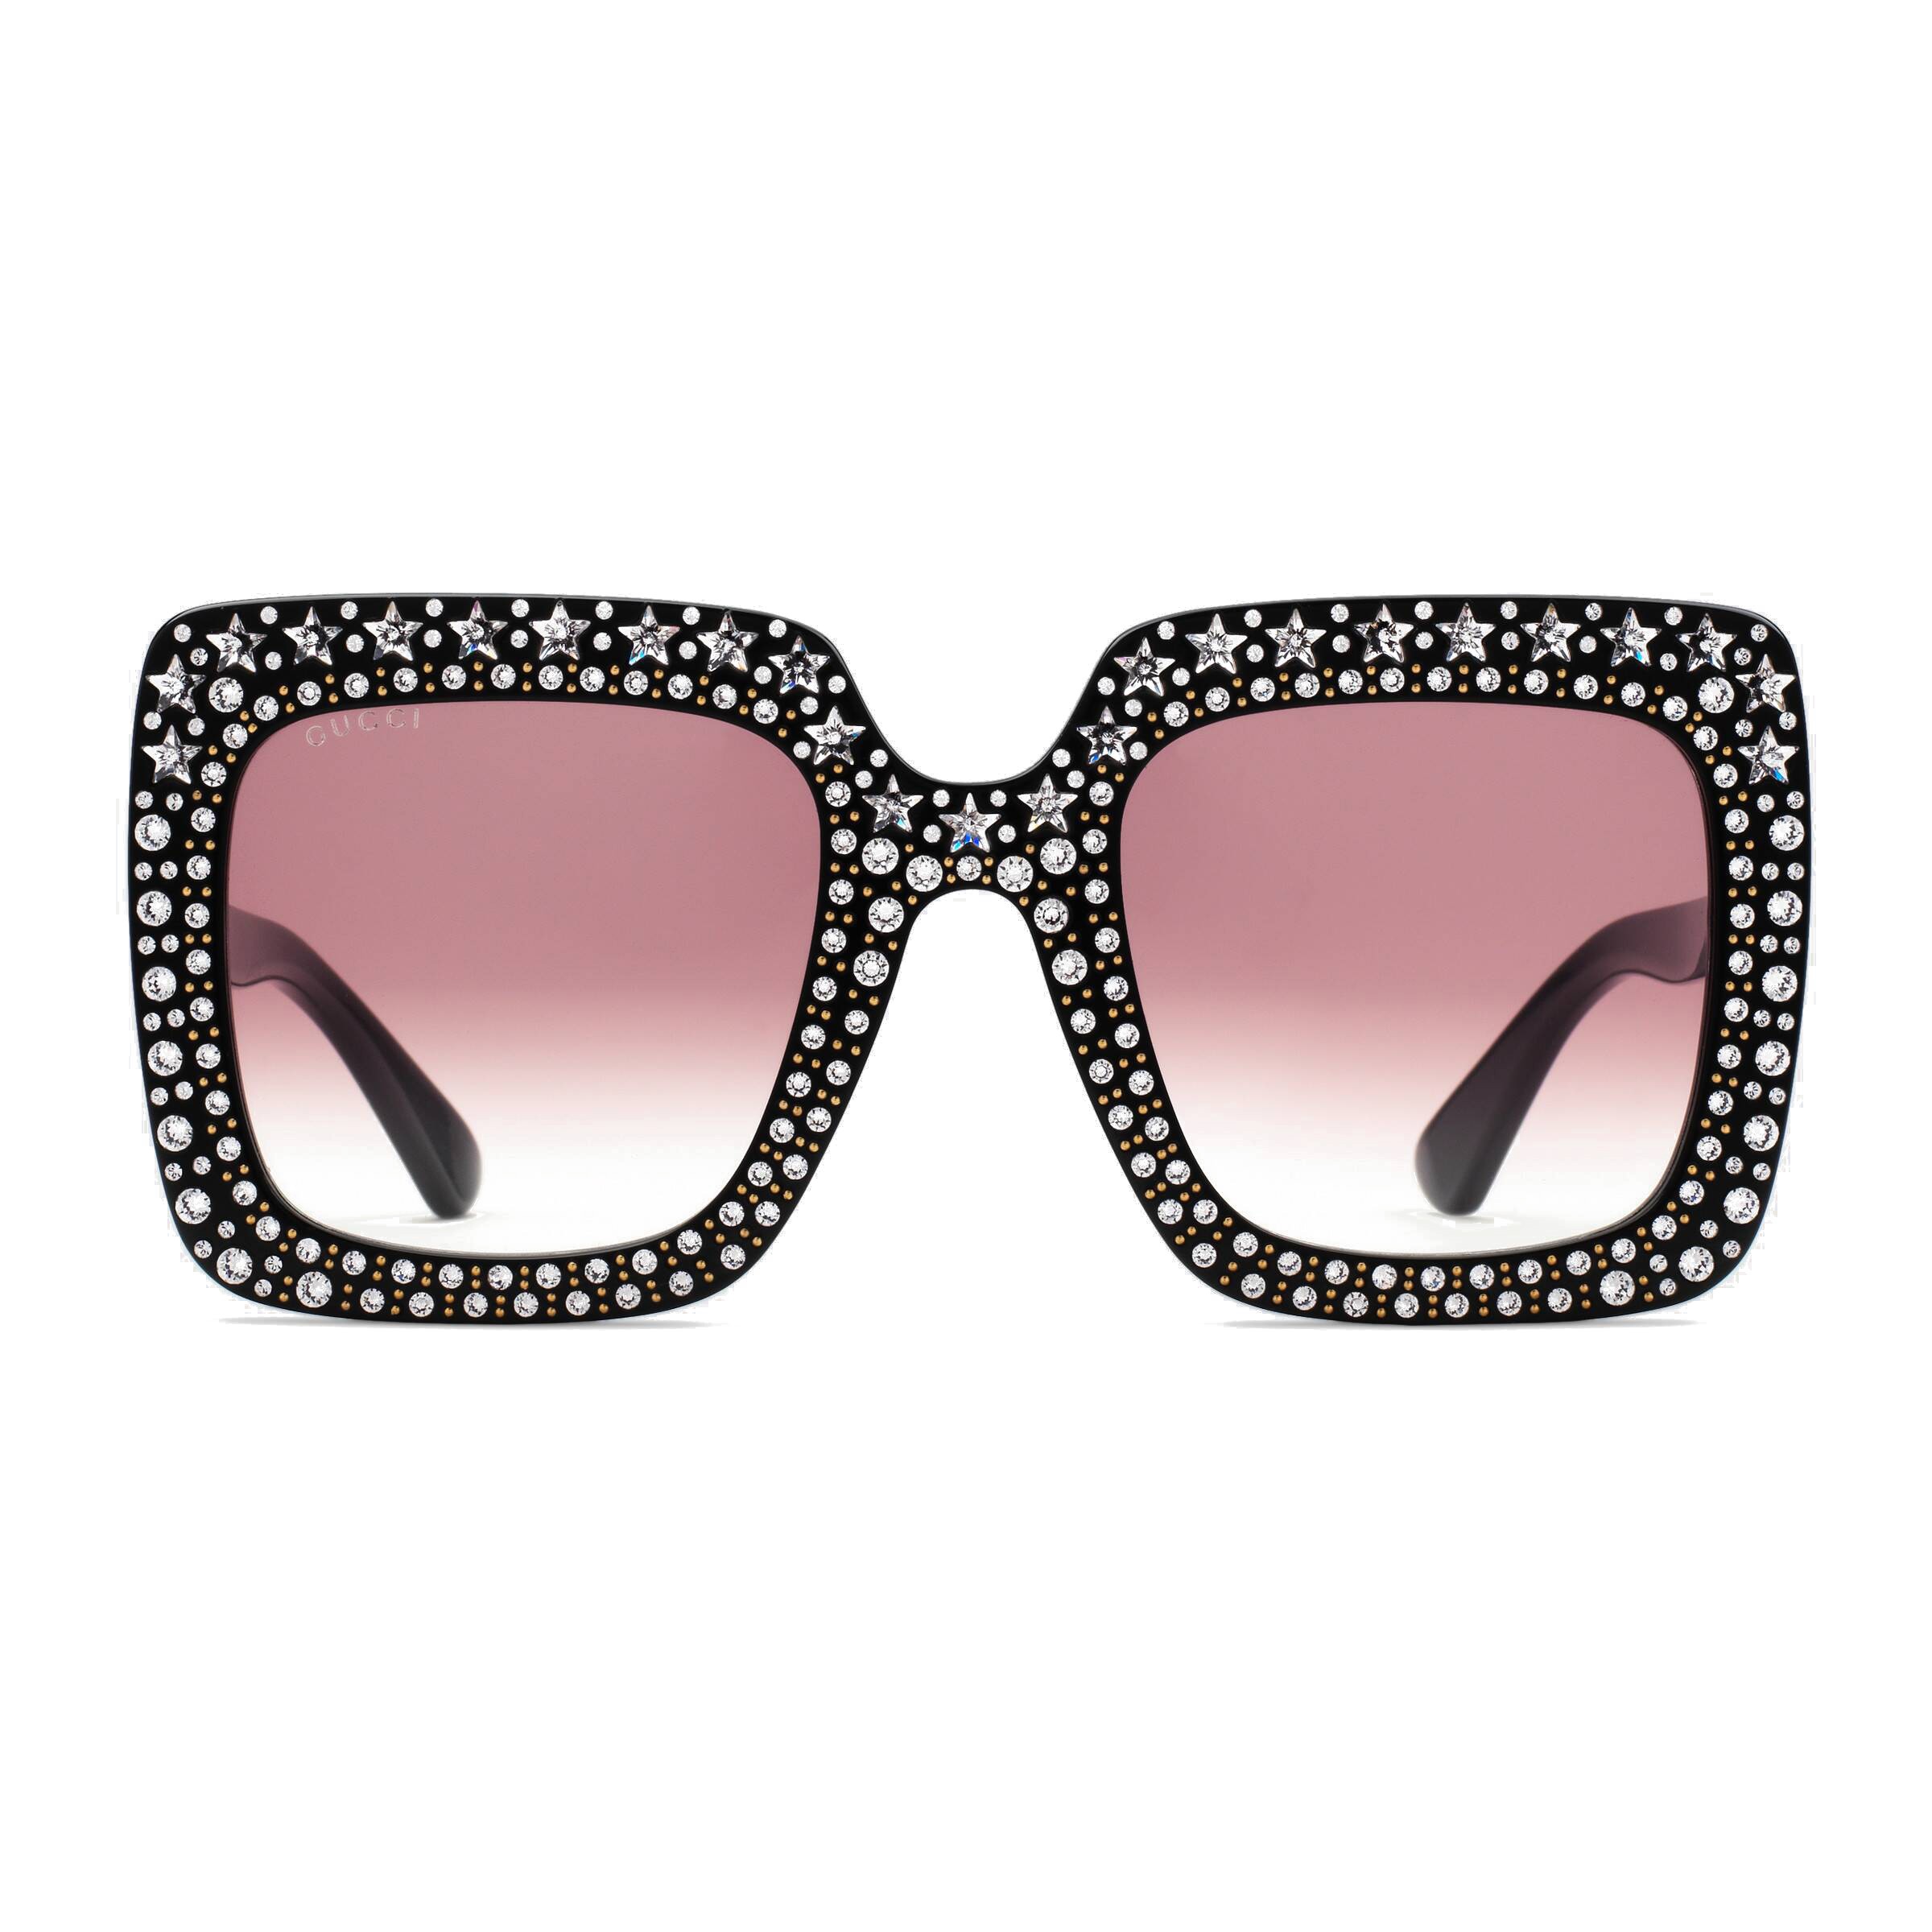 gucci sunglasses with stars on the side